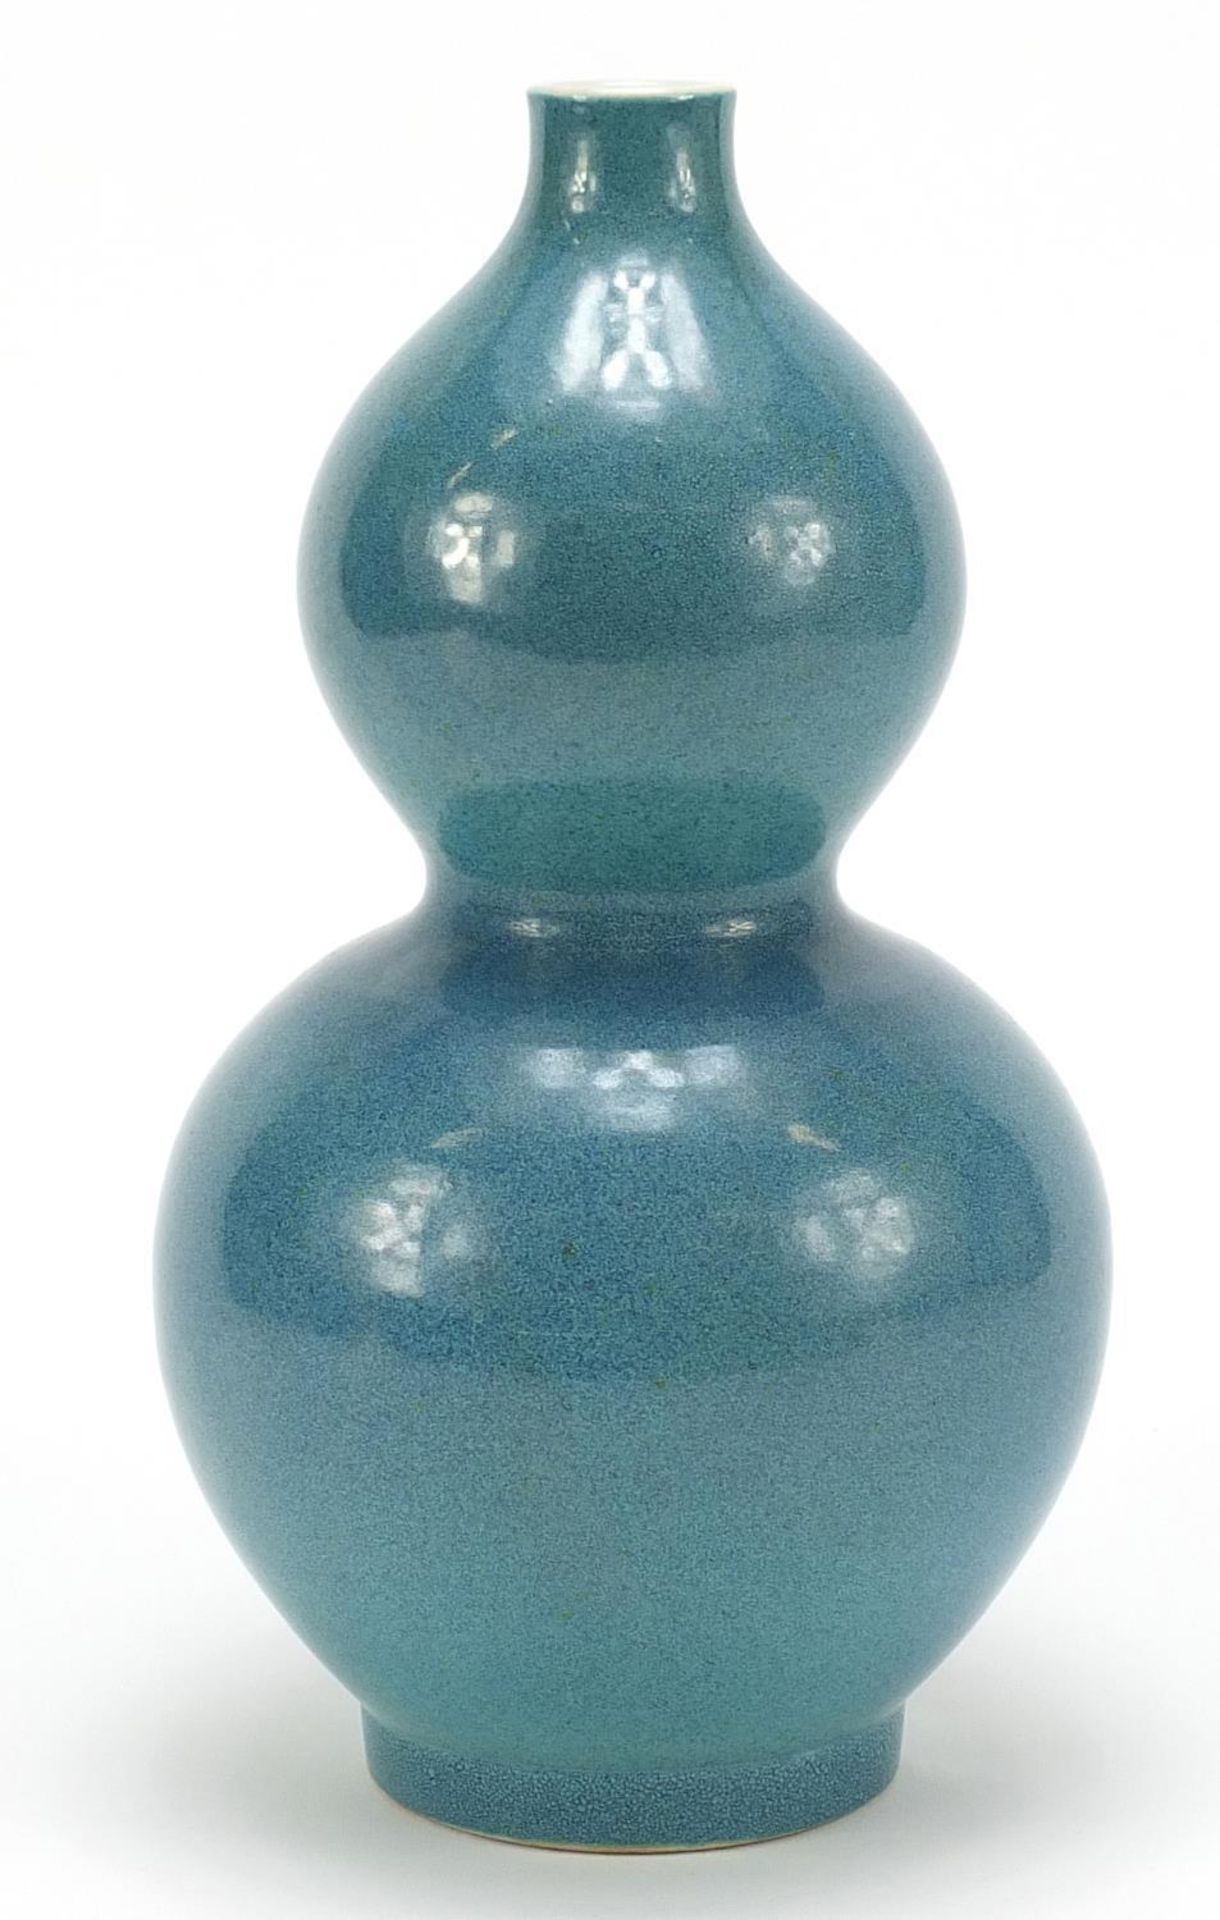 Chinese porcelain double gourd vase having a spotted turquoise glaze, 25.5cm high - Image 3 of 7